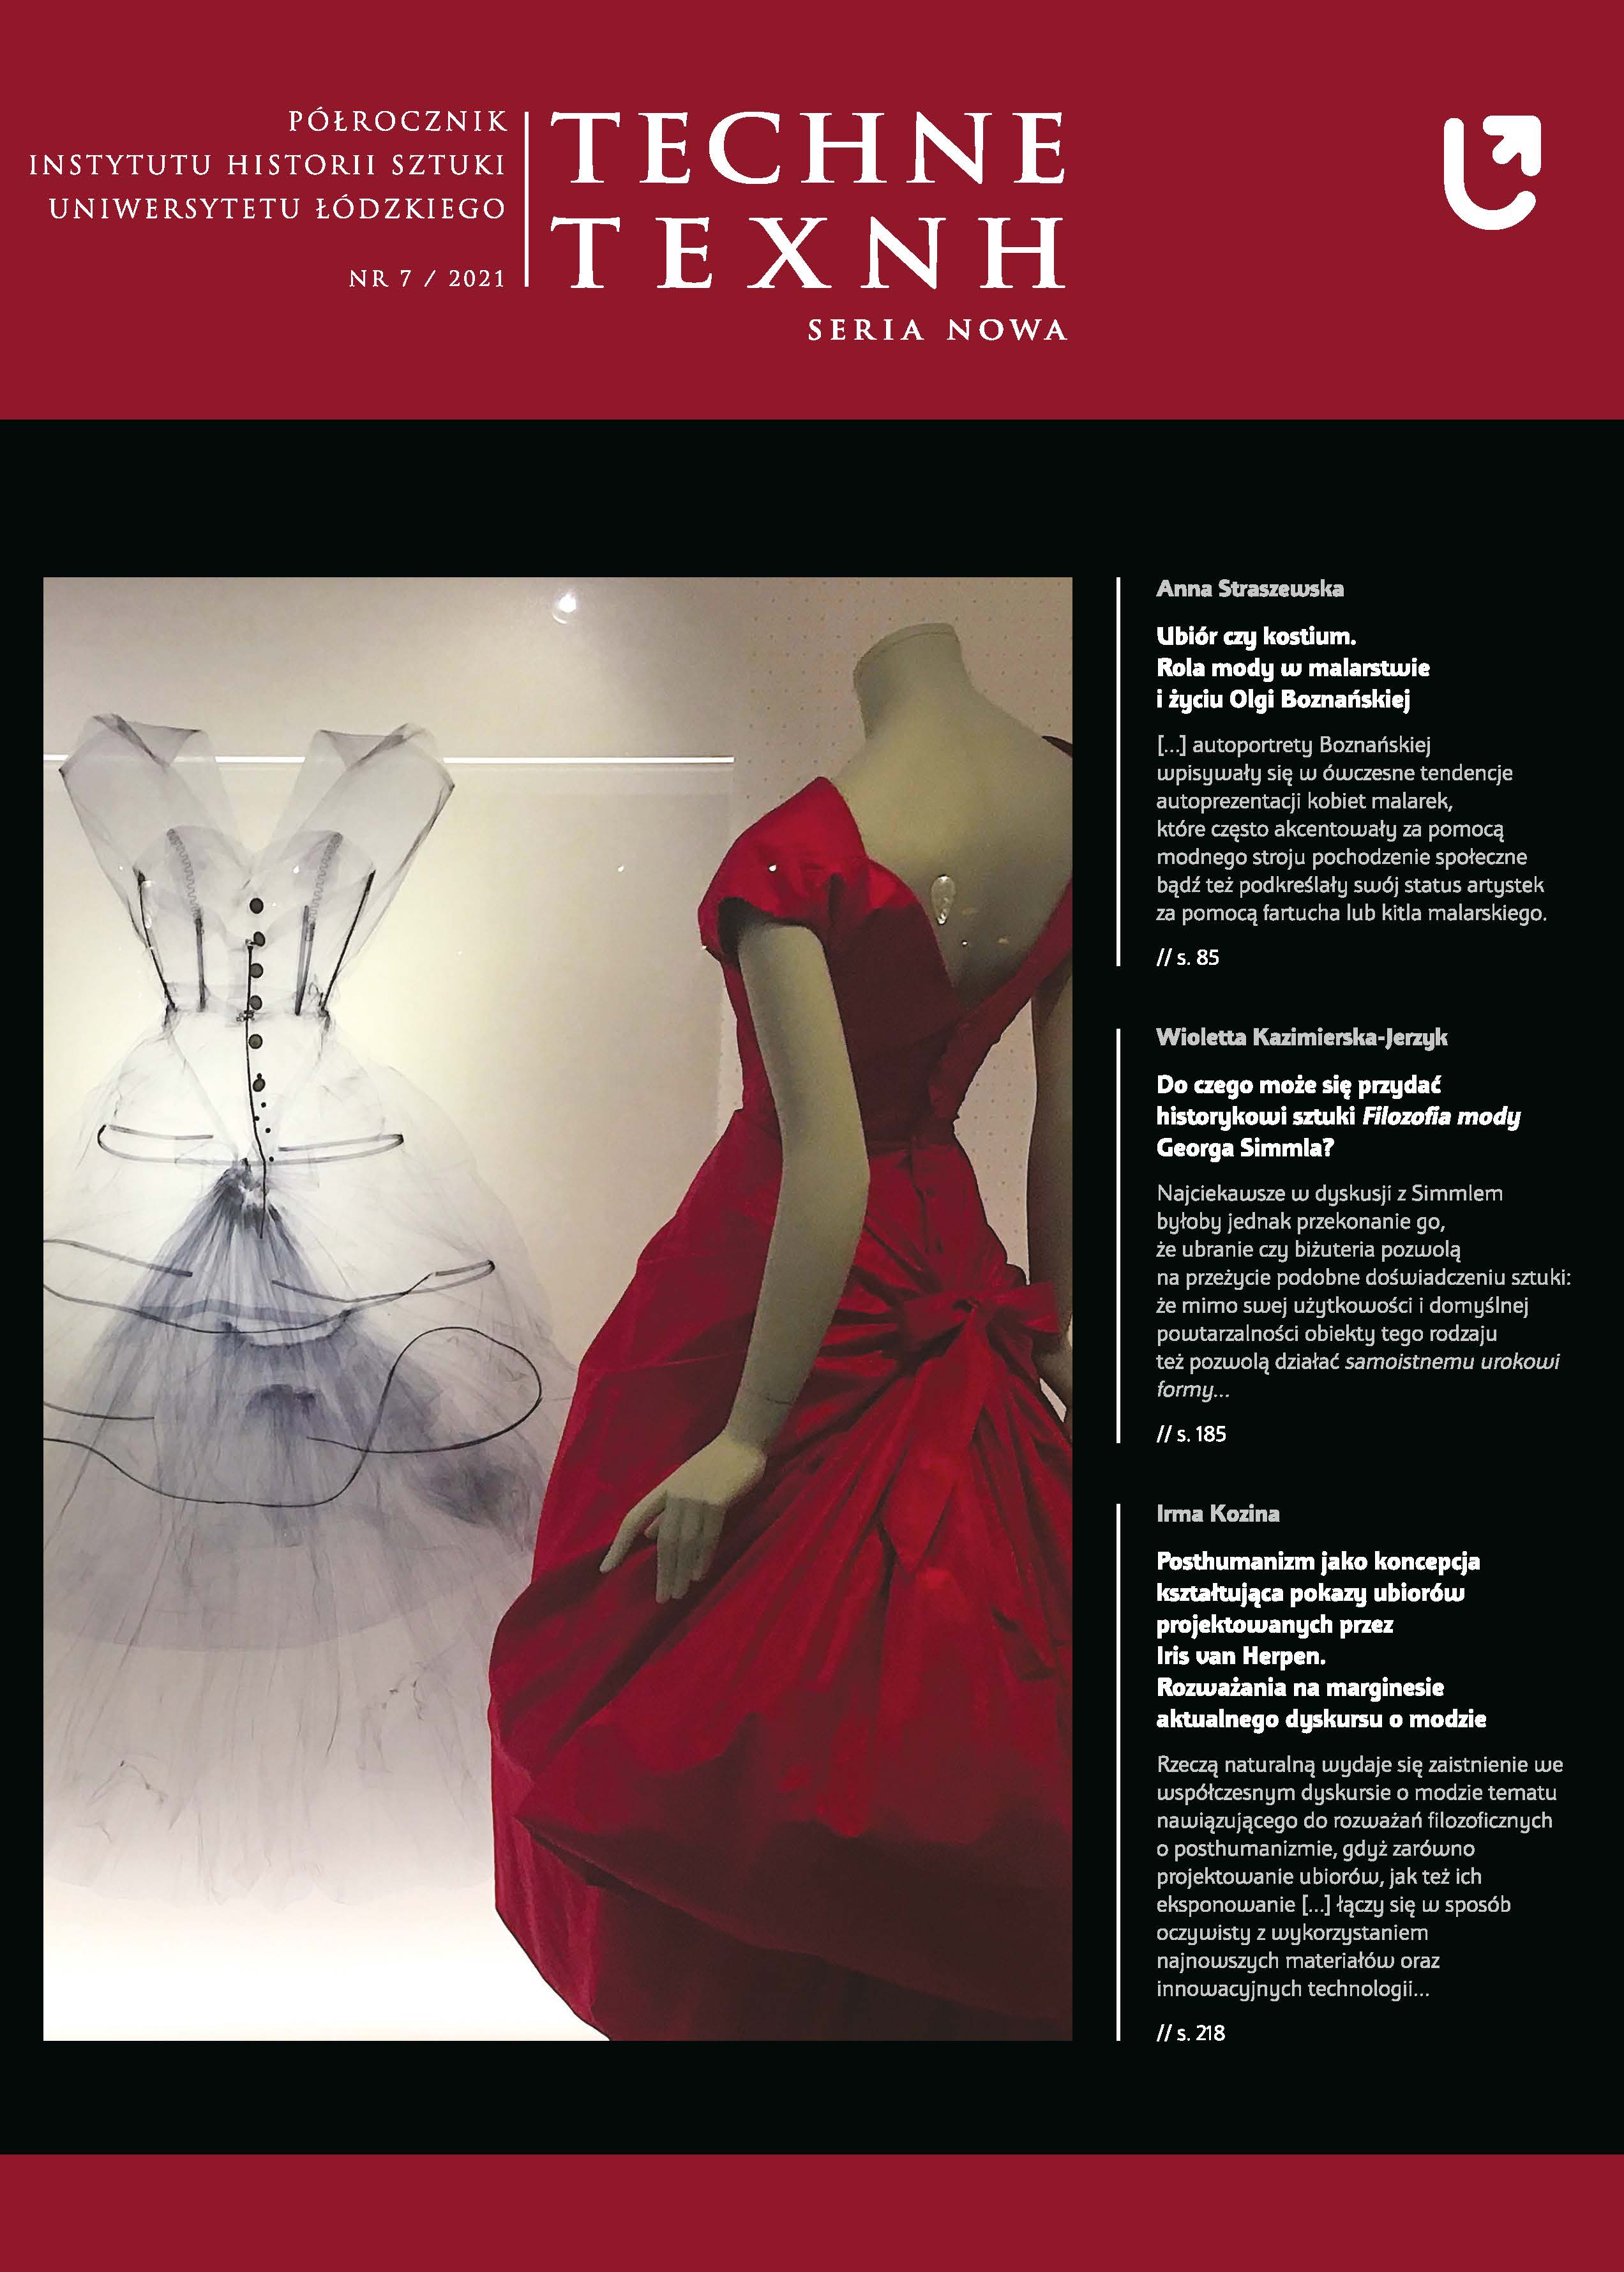 Women’s ready-made and made-to-measure fashion – basic differences and similarities in design, production and trade in the 2nd half of the 19th century and the beginning of the 20th century Cover Image